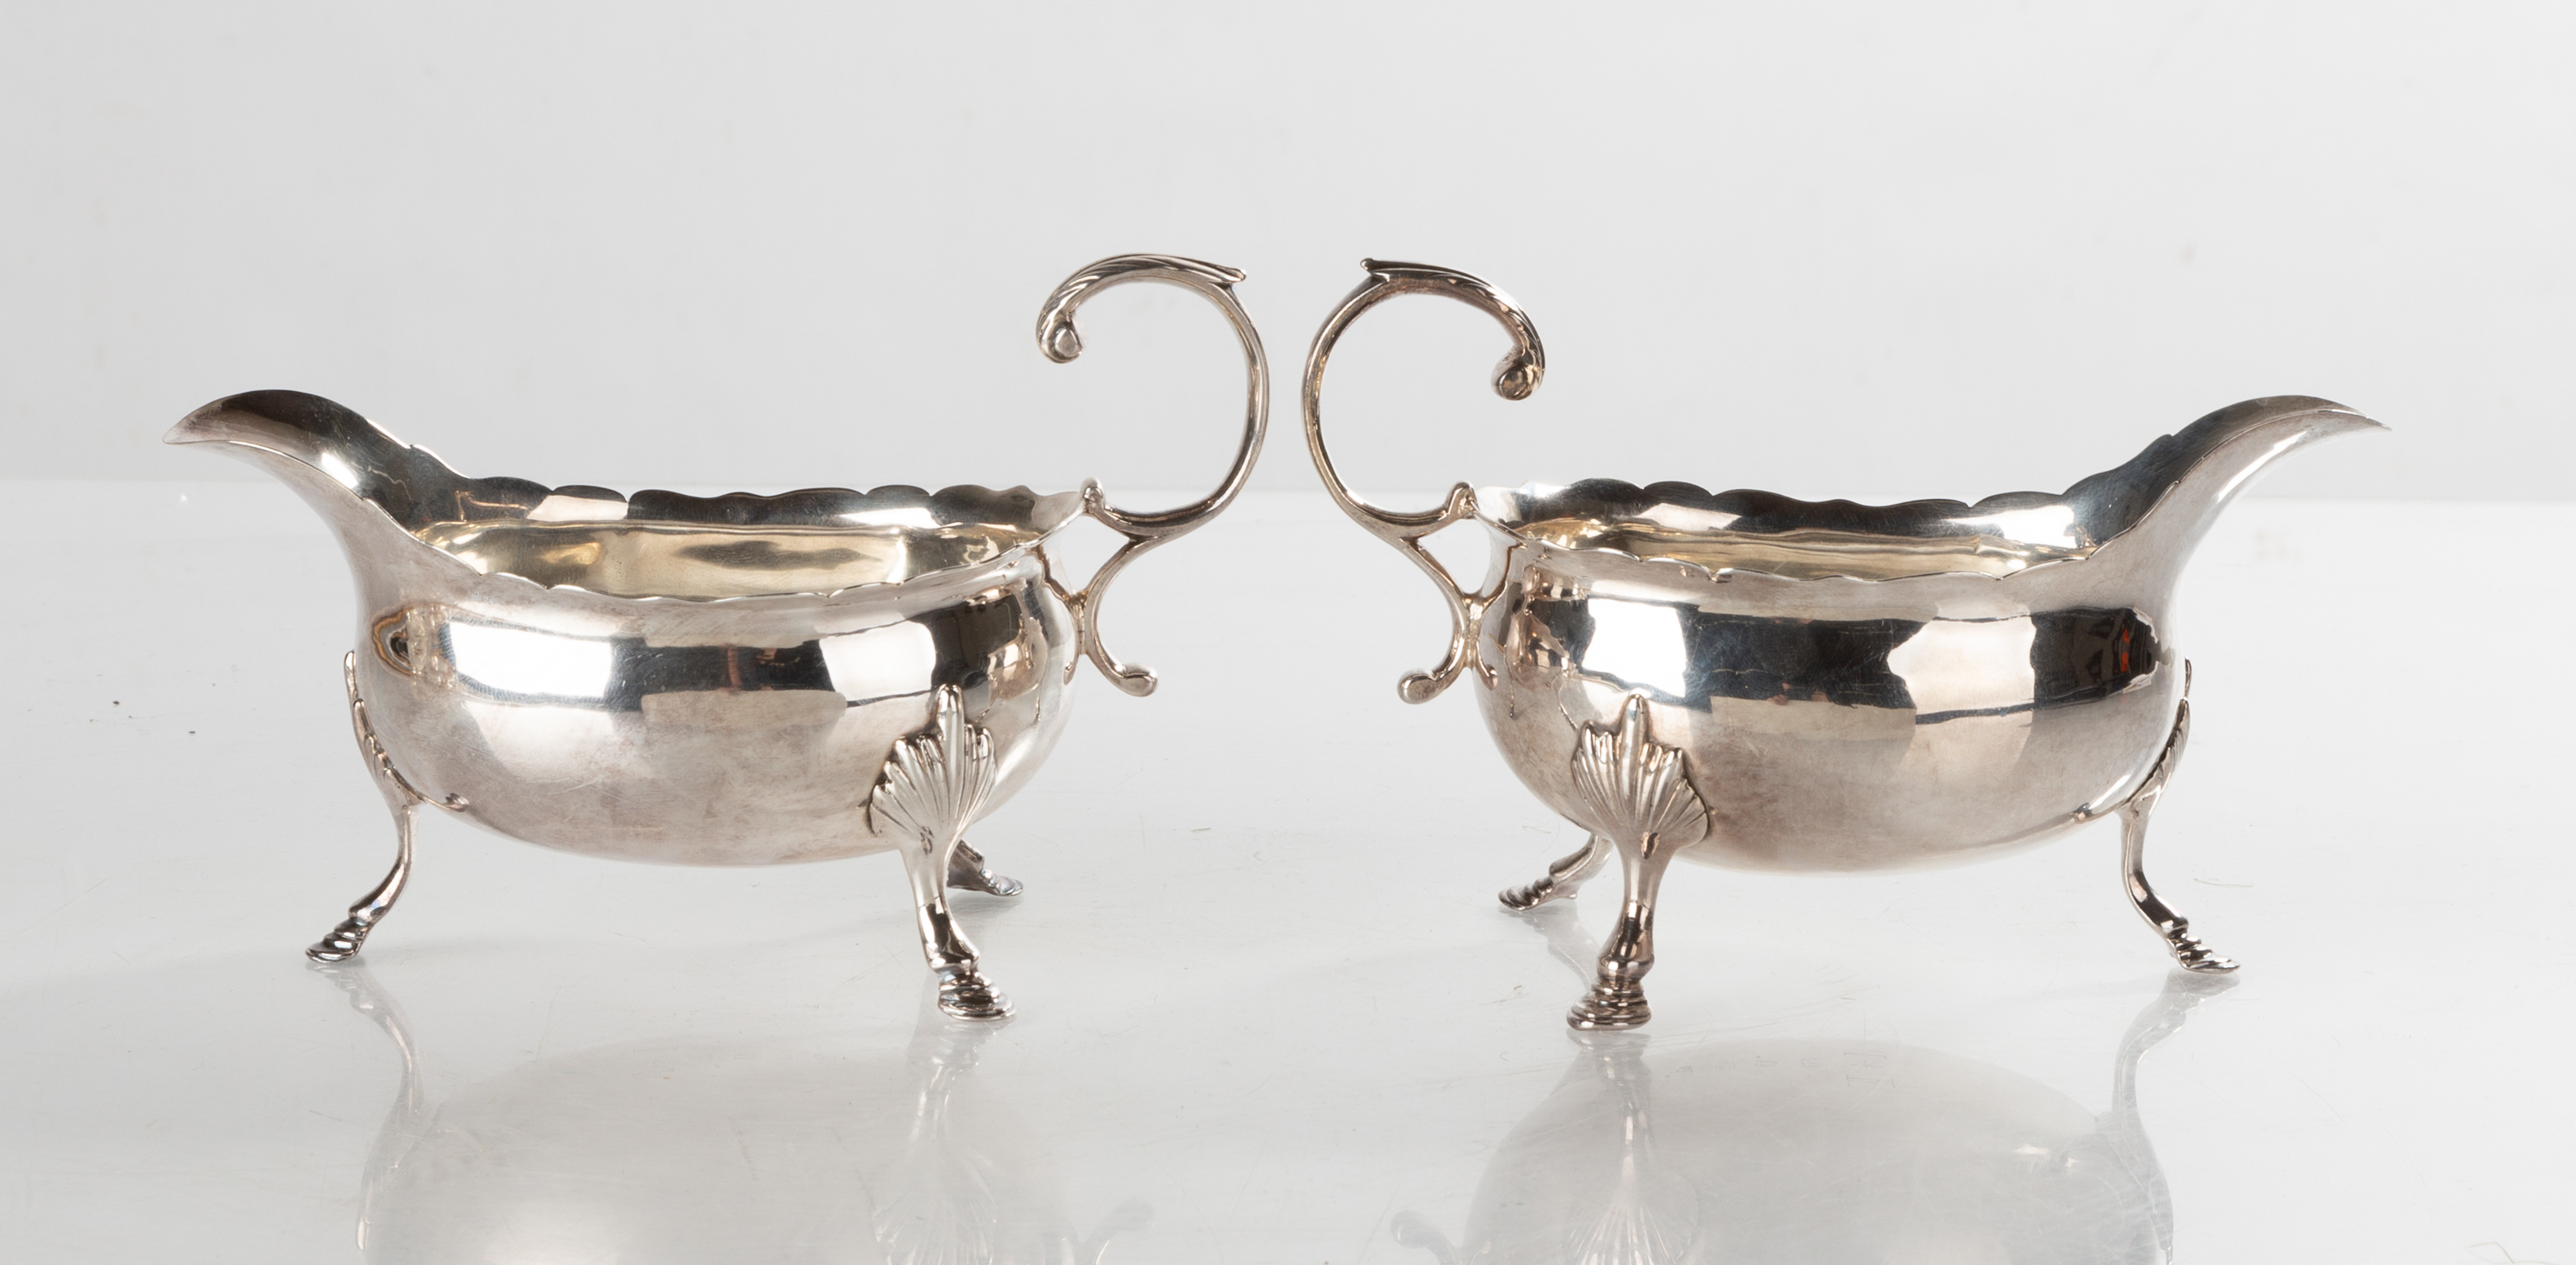 PAIR OF 18TH CENTURY ENGLISH STERLING